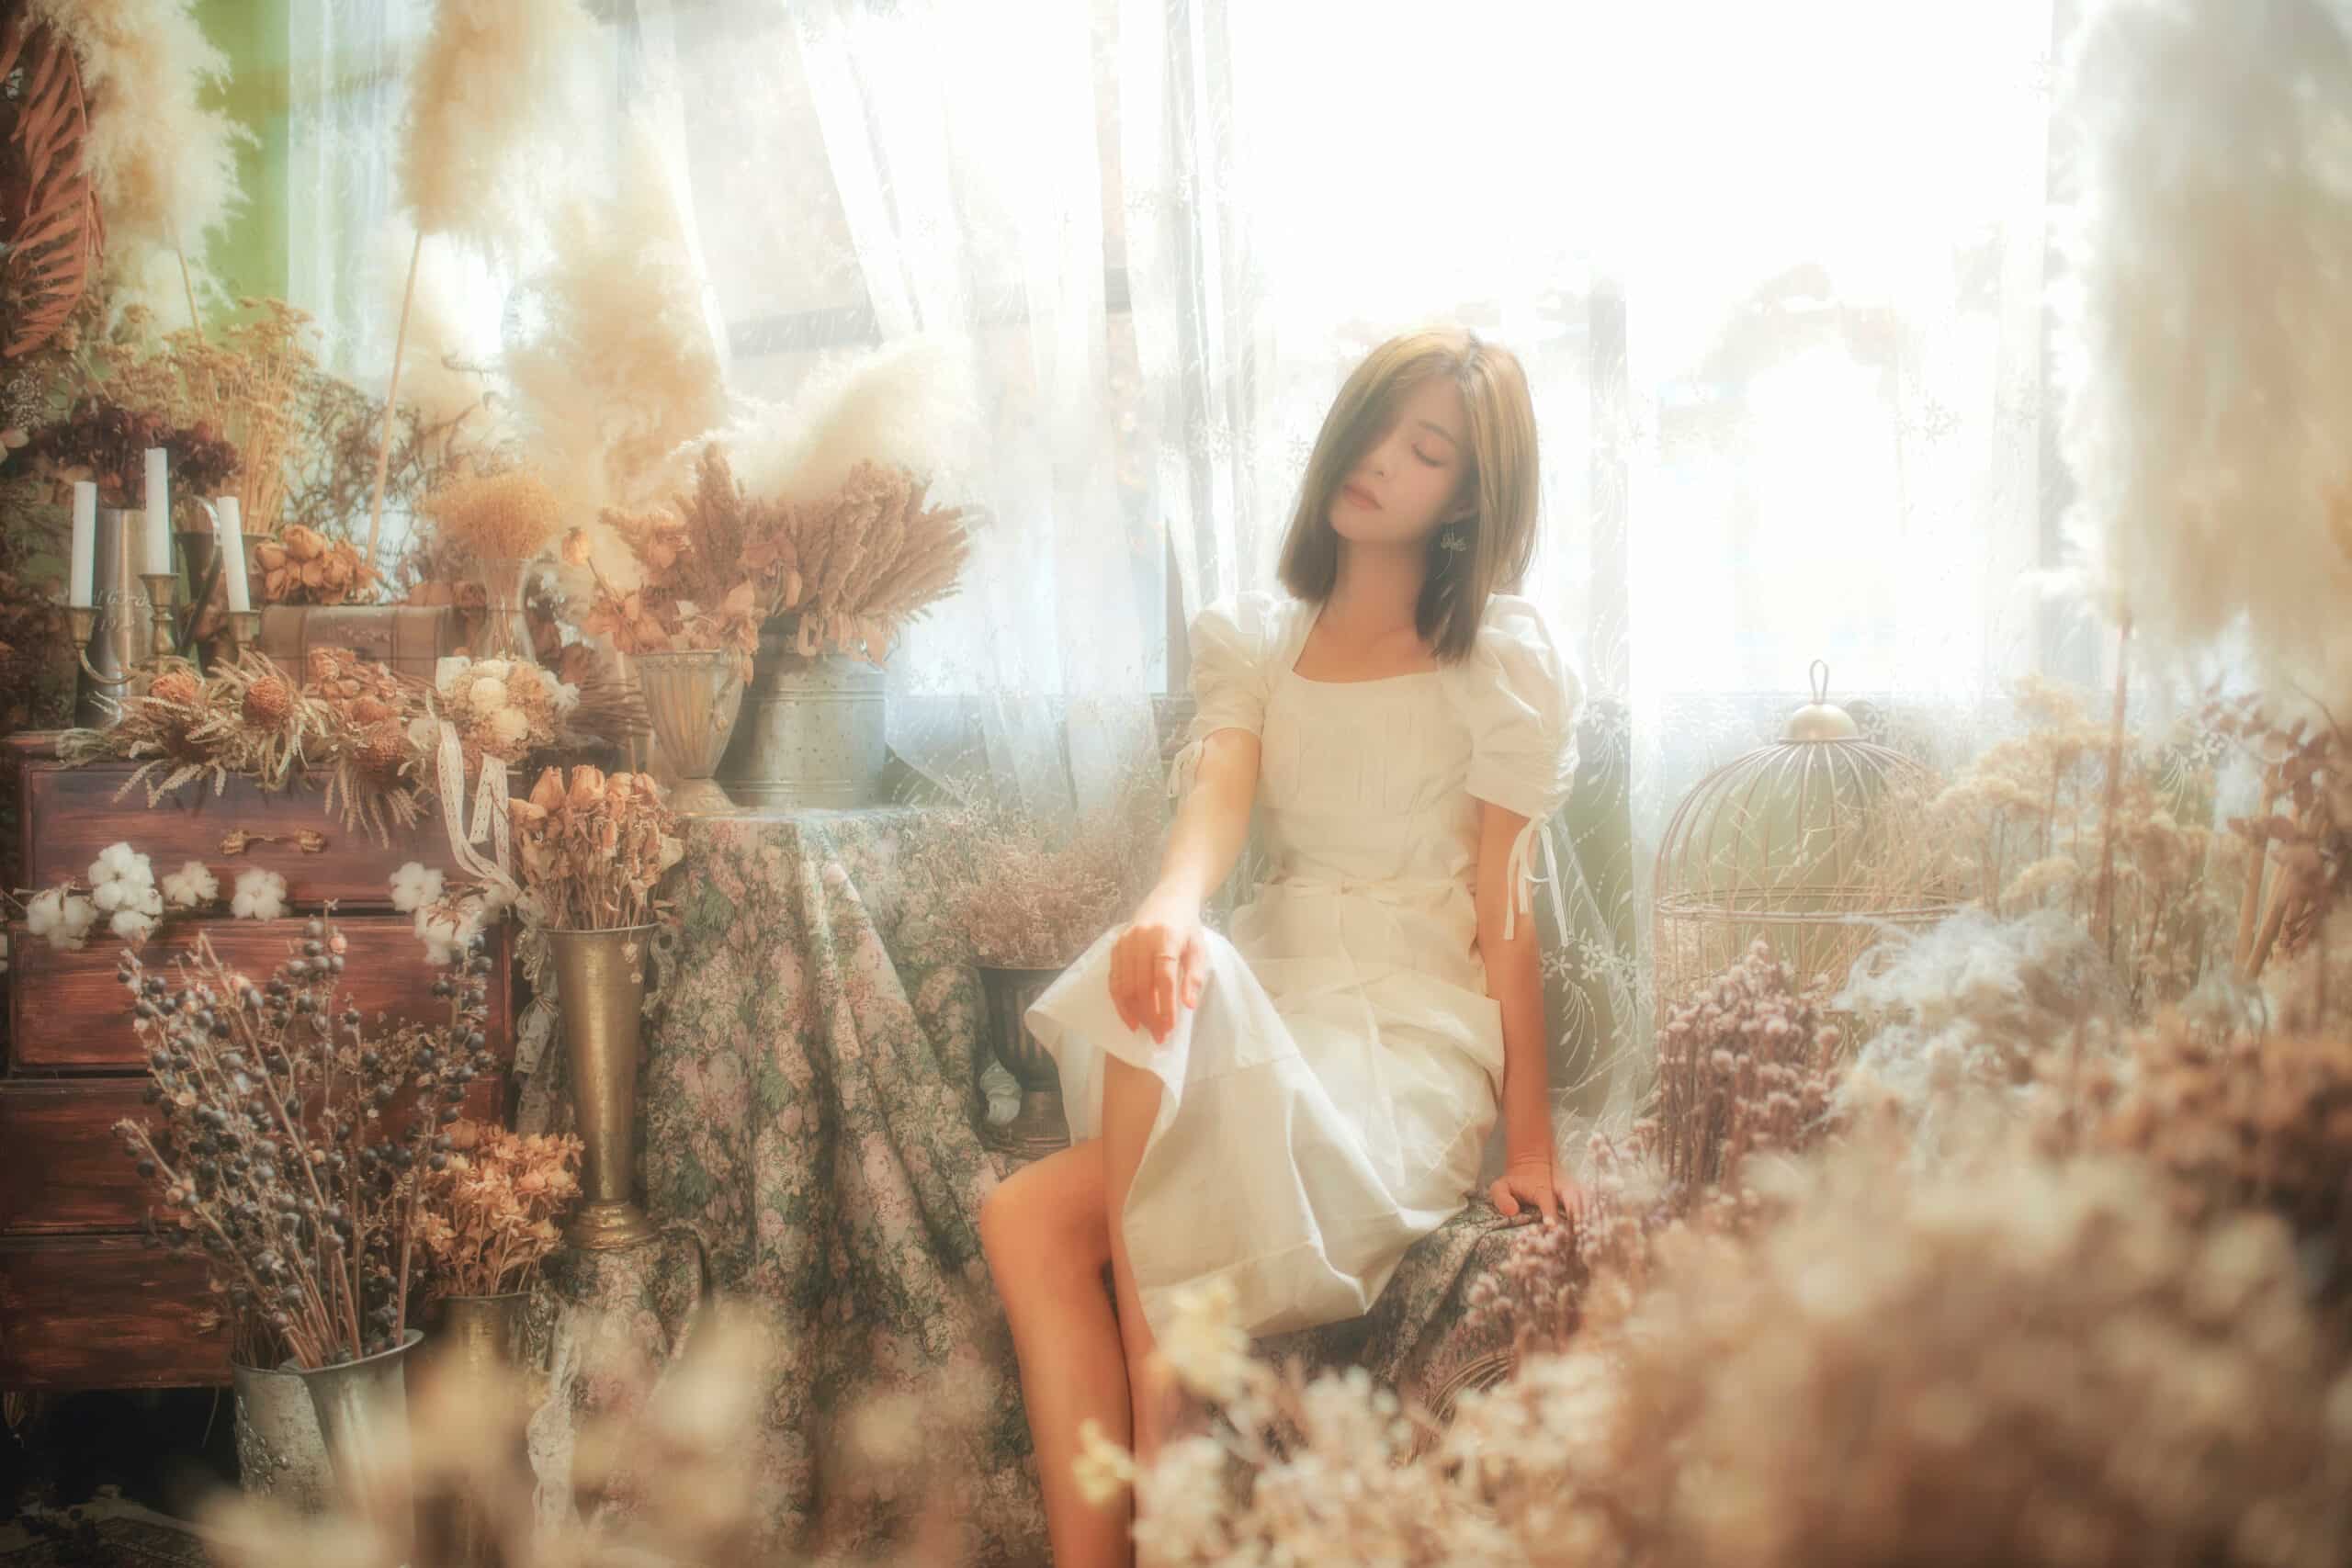 asian young woman in white dress sitting in a flower decorated room